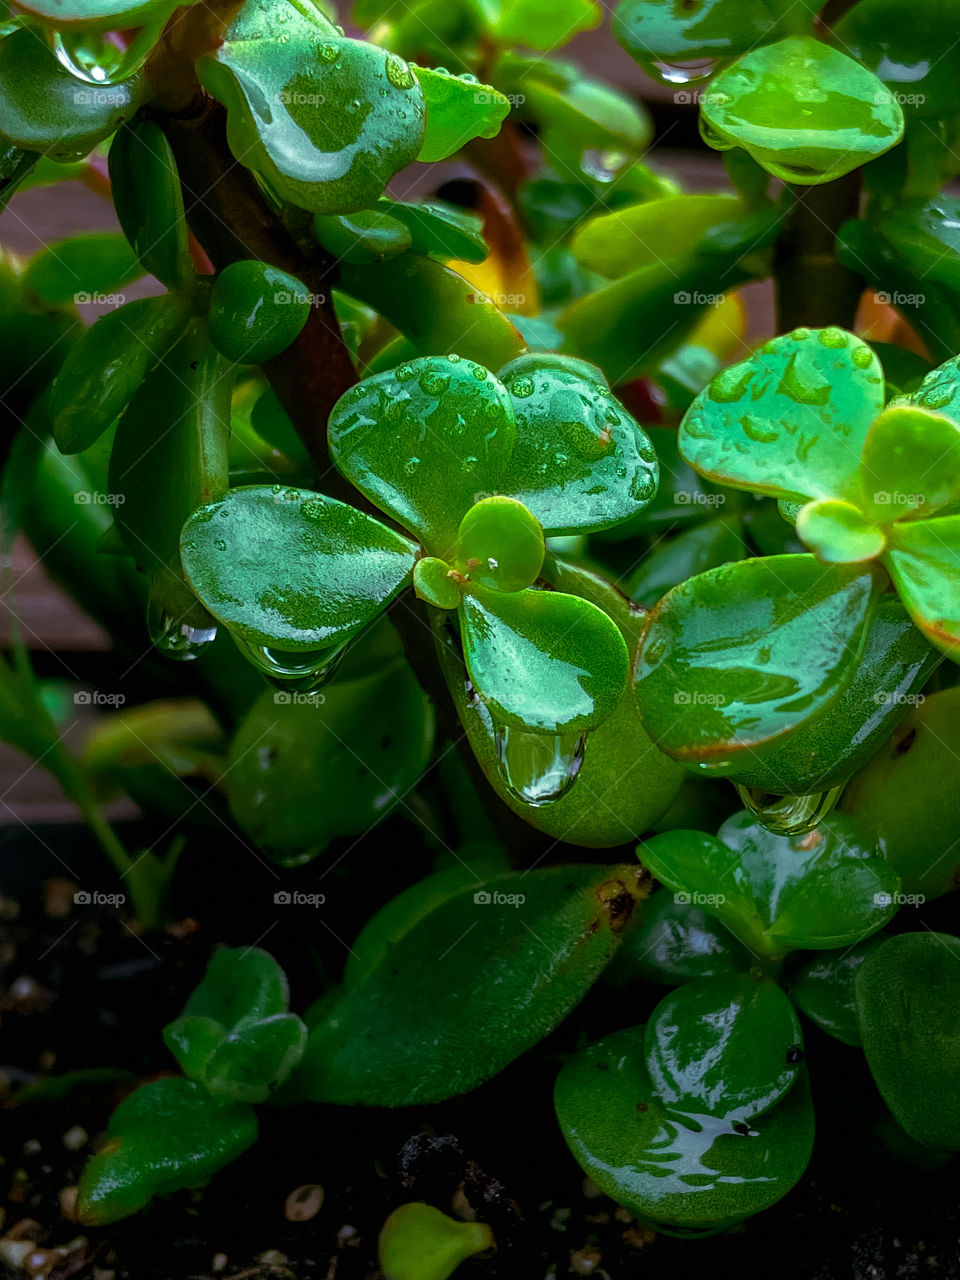 leaf rainfall green raindrops waterdrops droplets wet water rain drop outside nature outdoors elements dew dewdrops plant plants leafs Grass splashes phone photography rubber dewy storm